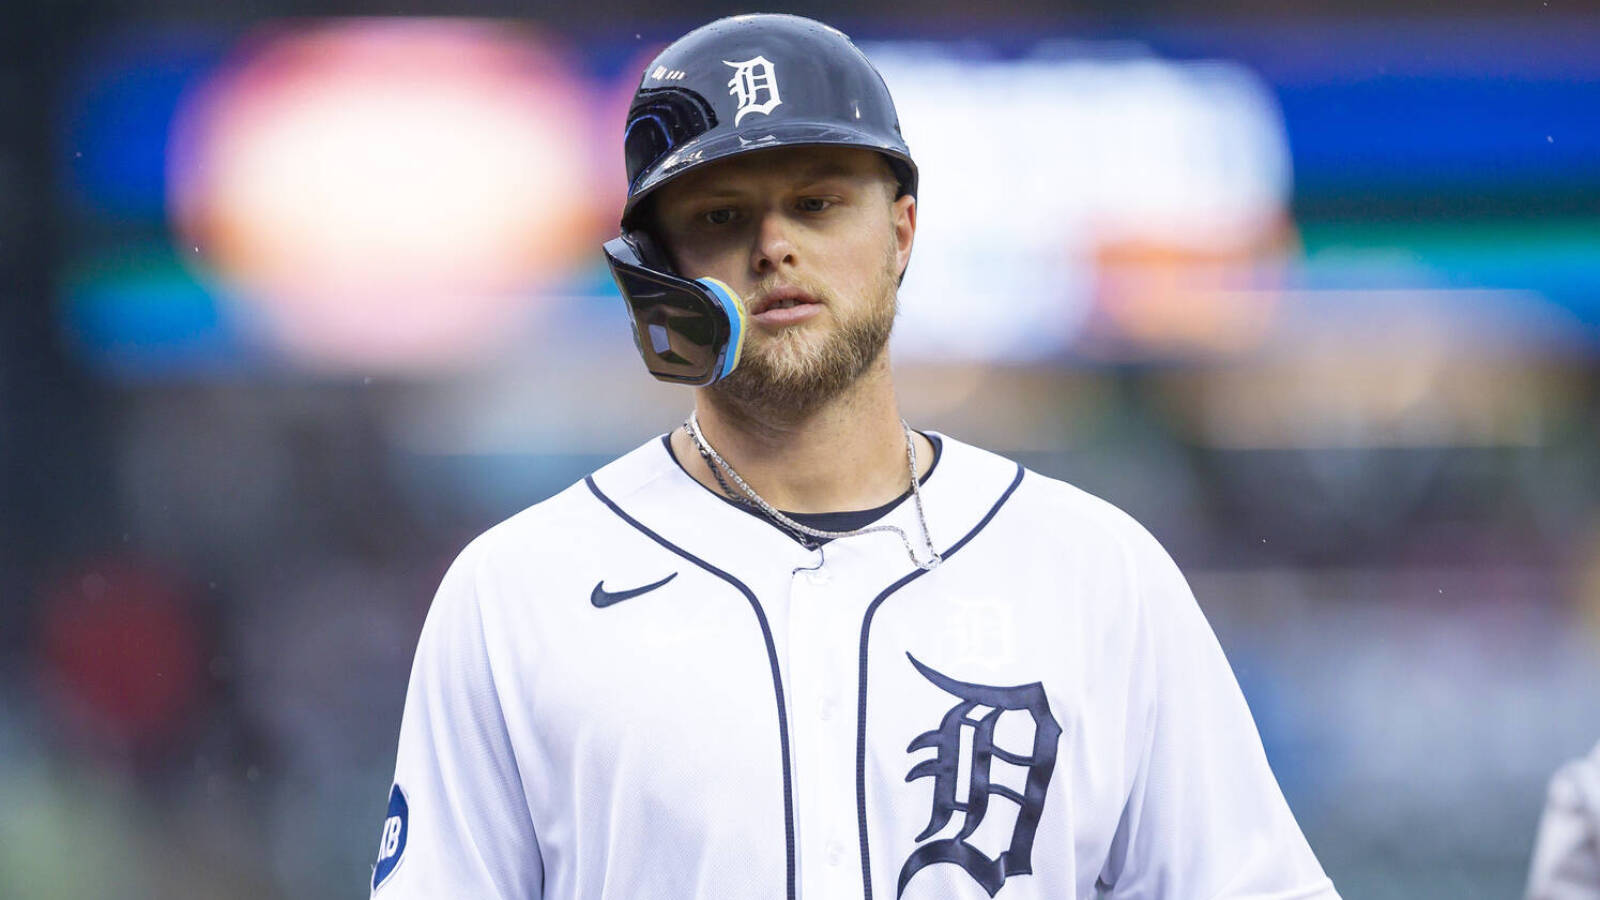 Tigers activate OF Austin Meadows from IL